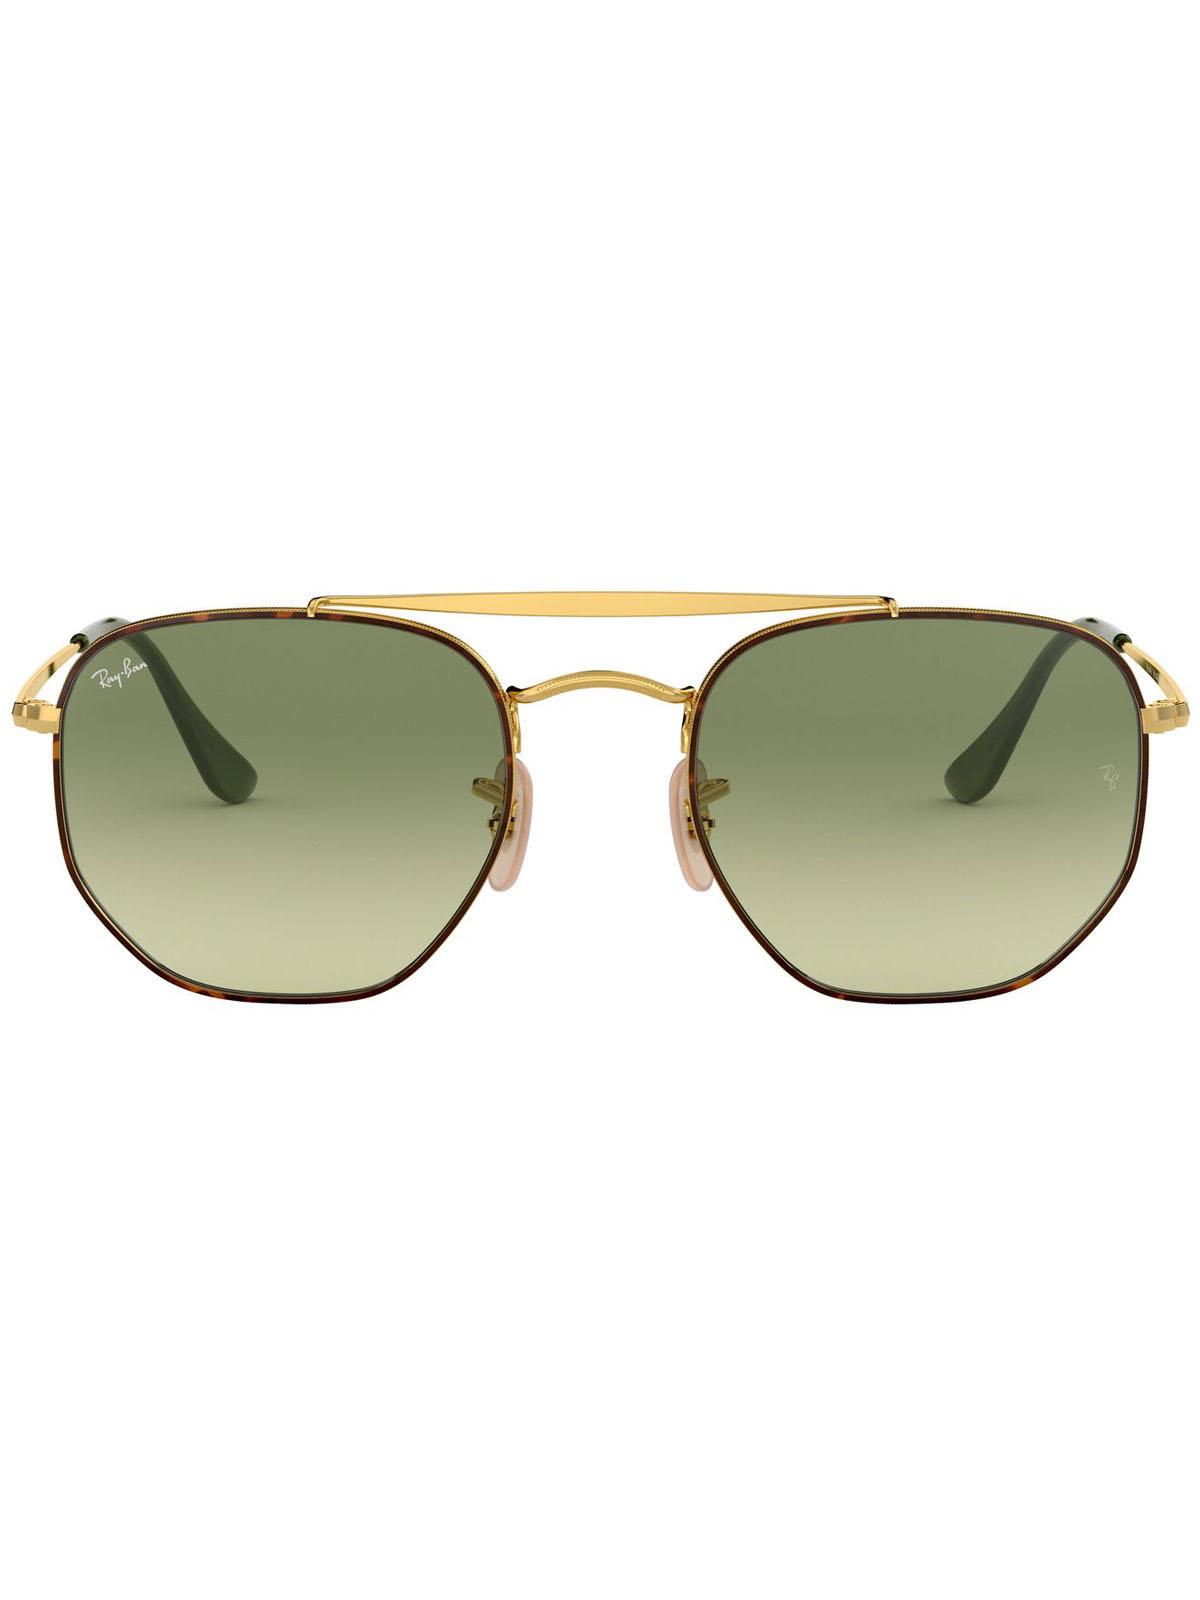 Ray-Ban Sunglasses - RB3648-9103/4M-51 - LifeStyle Collection